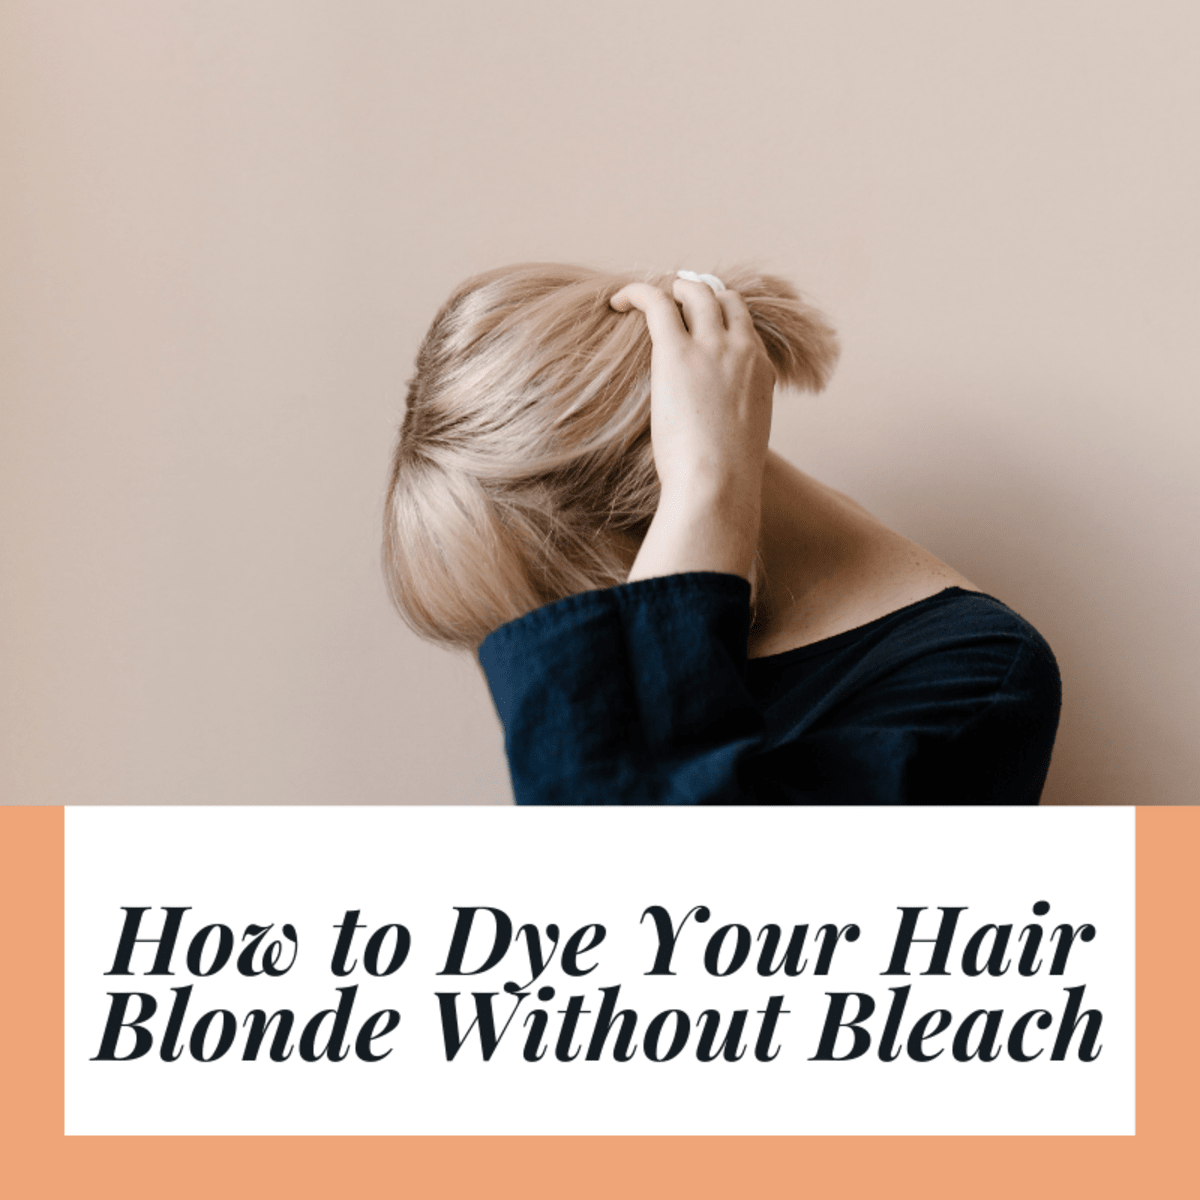 32 Top Pictures How To Dye Hair Blonde With Bleach How To Dye Your Hair Blonde Without Bleach